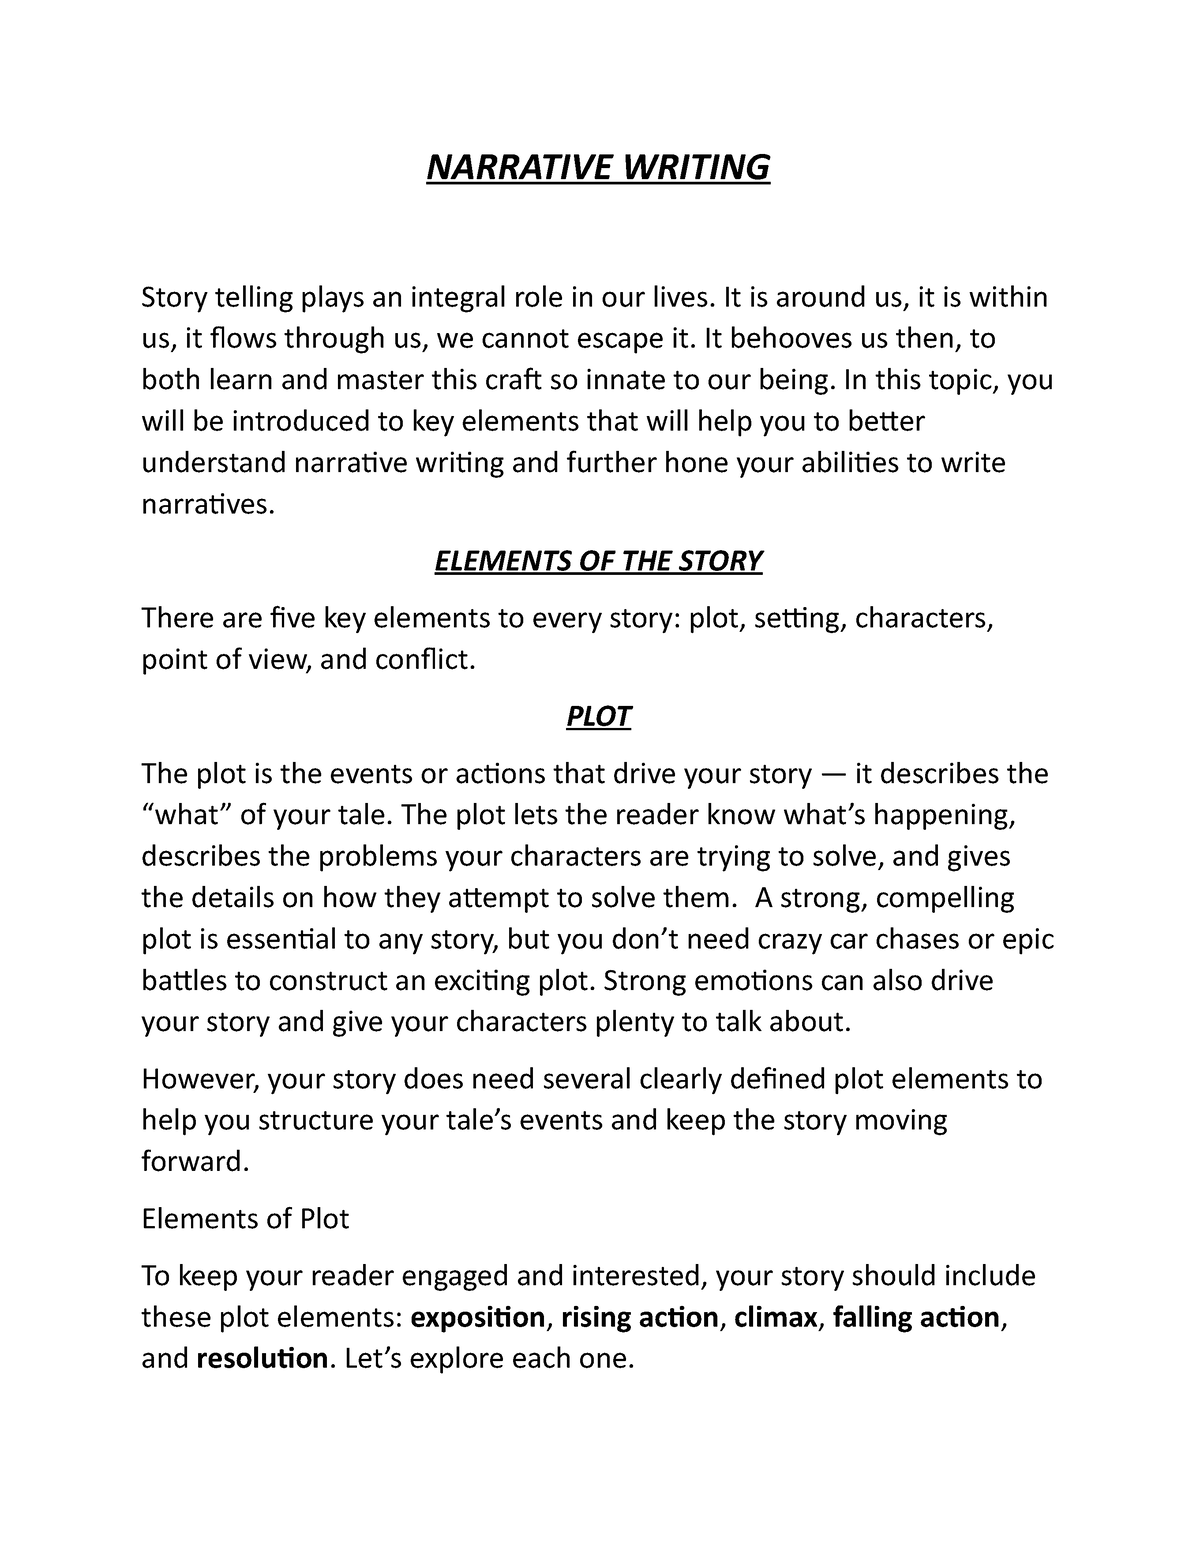 Narrative Writing- Notes - NARRATIVE WRITING Story telling plays an ...